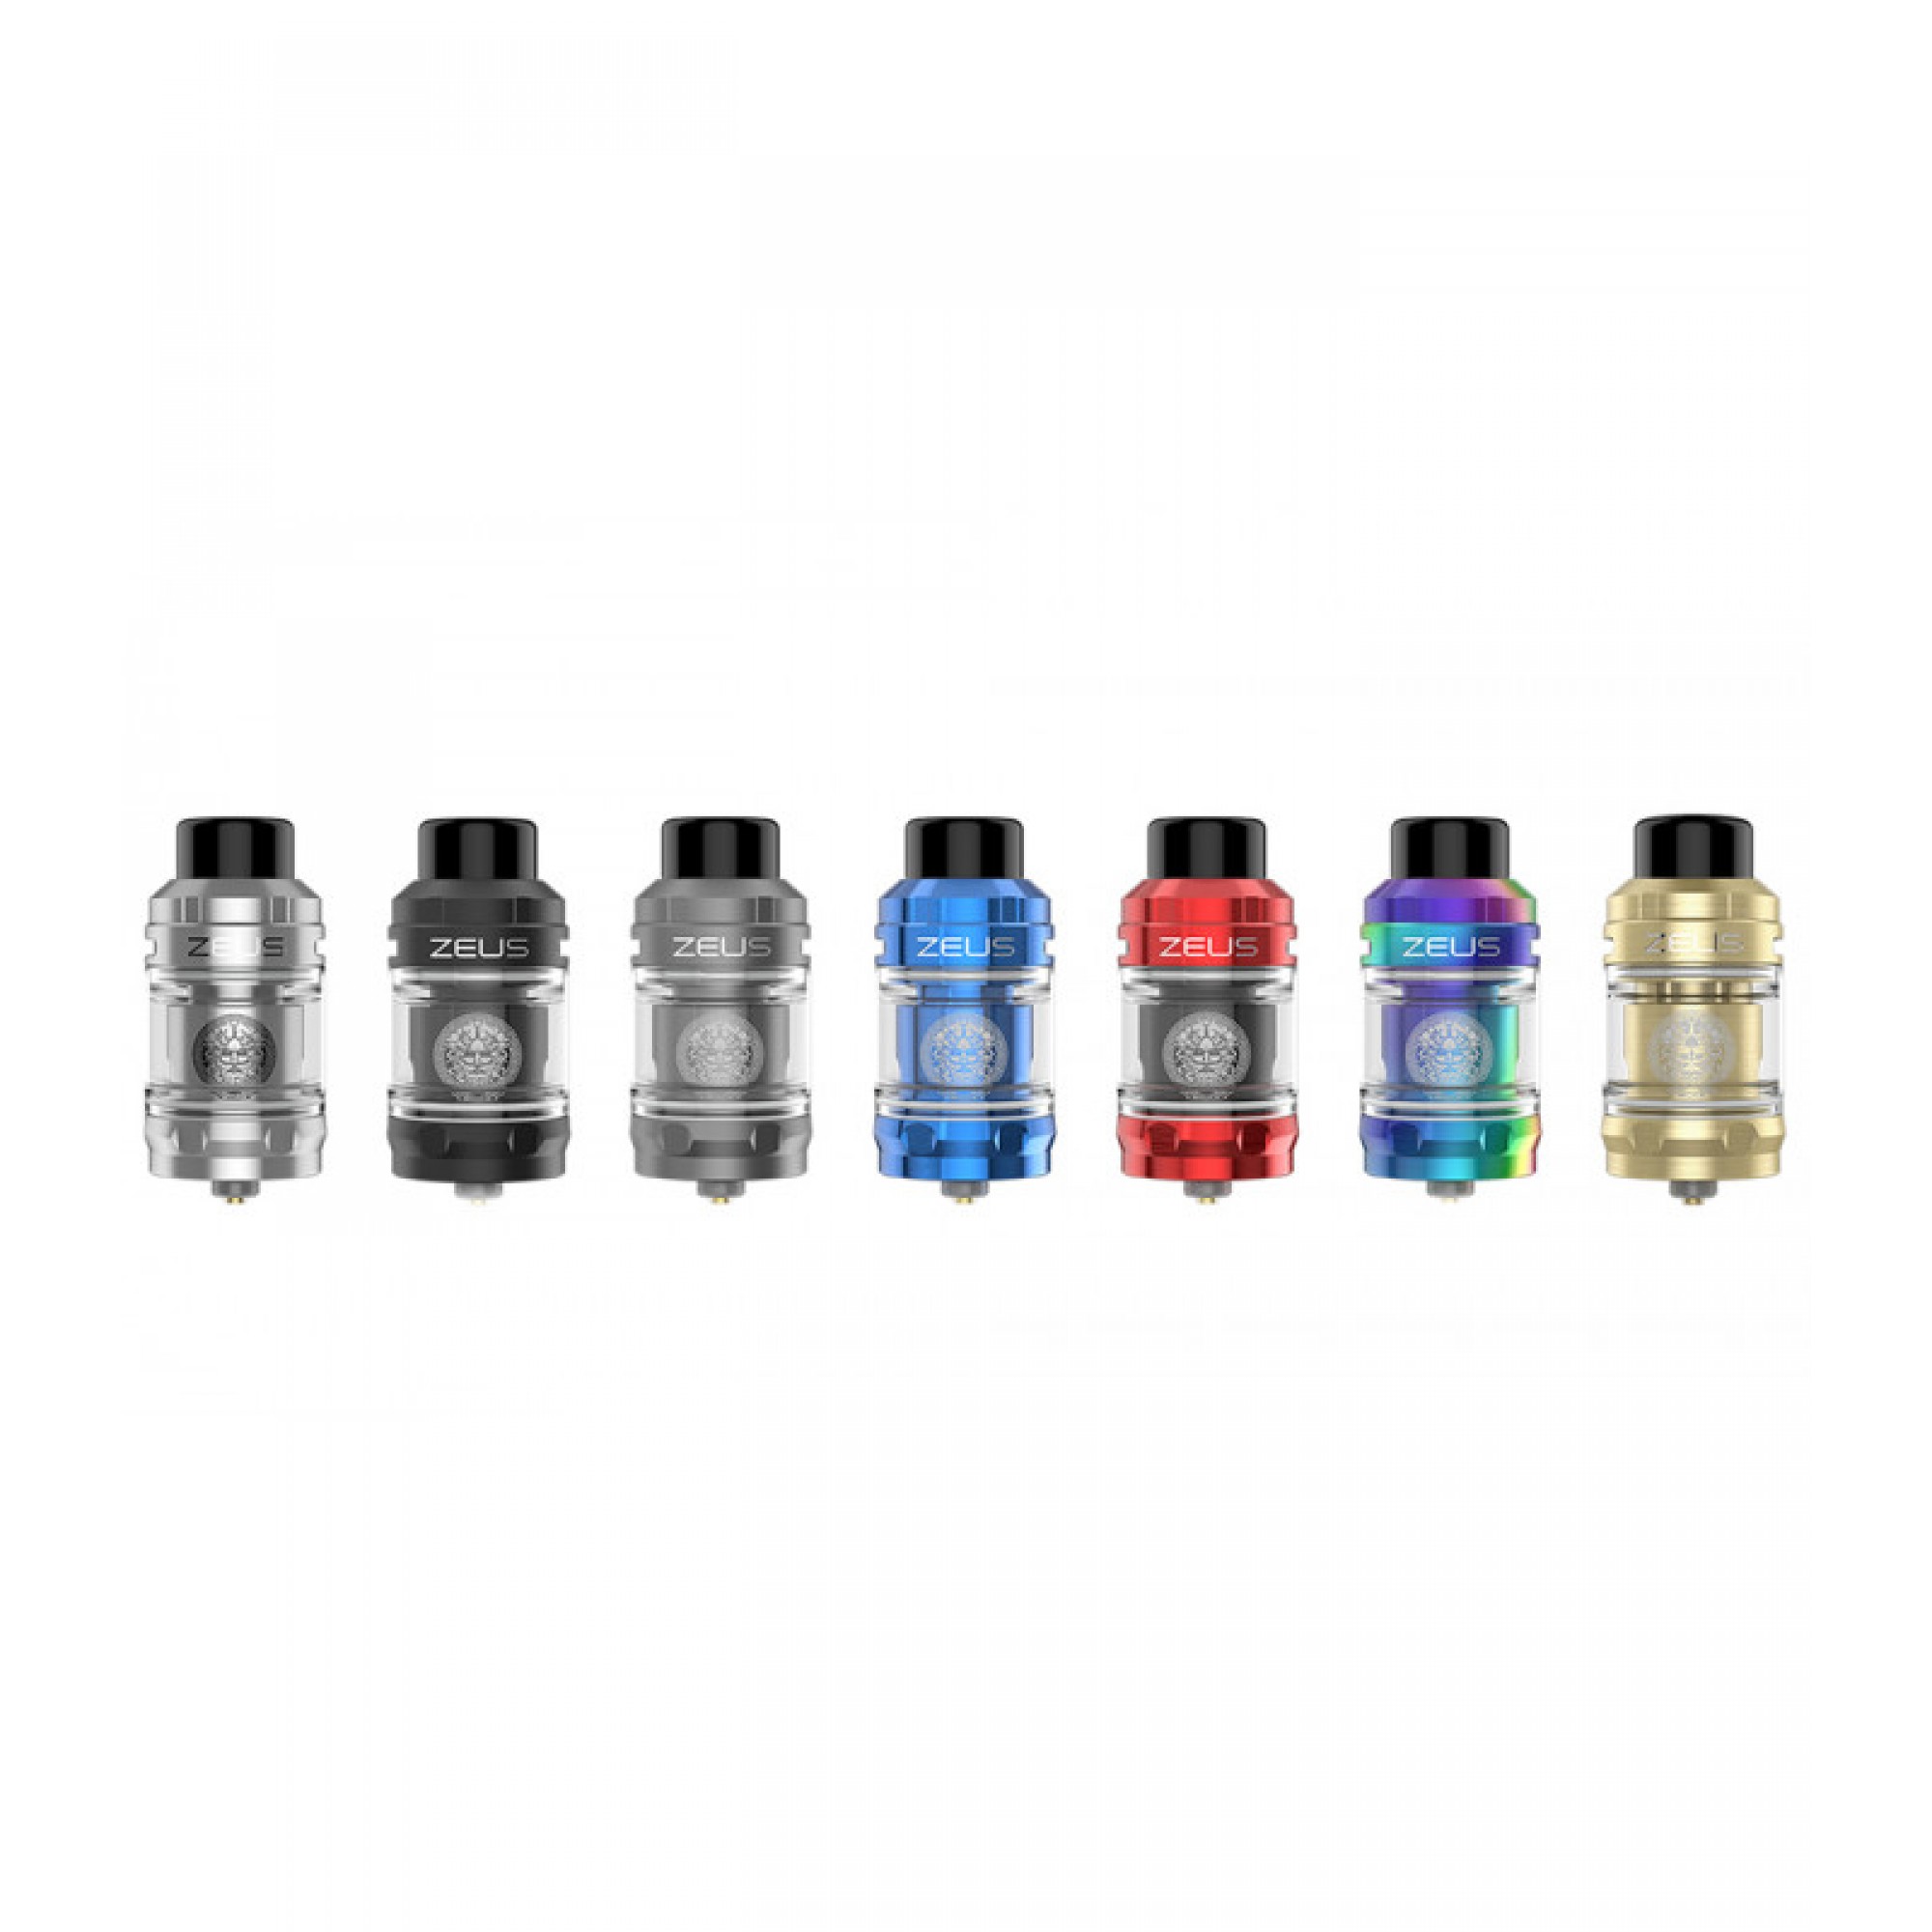 Aromamizer plus rdta by steam crave фото 115